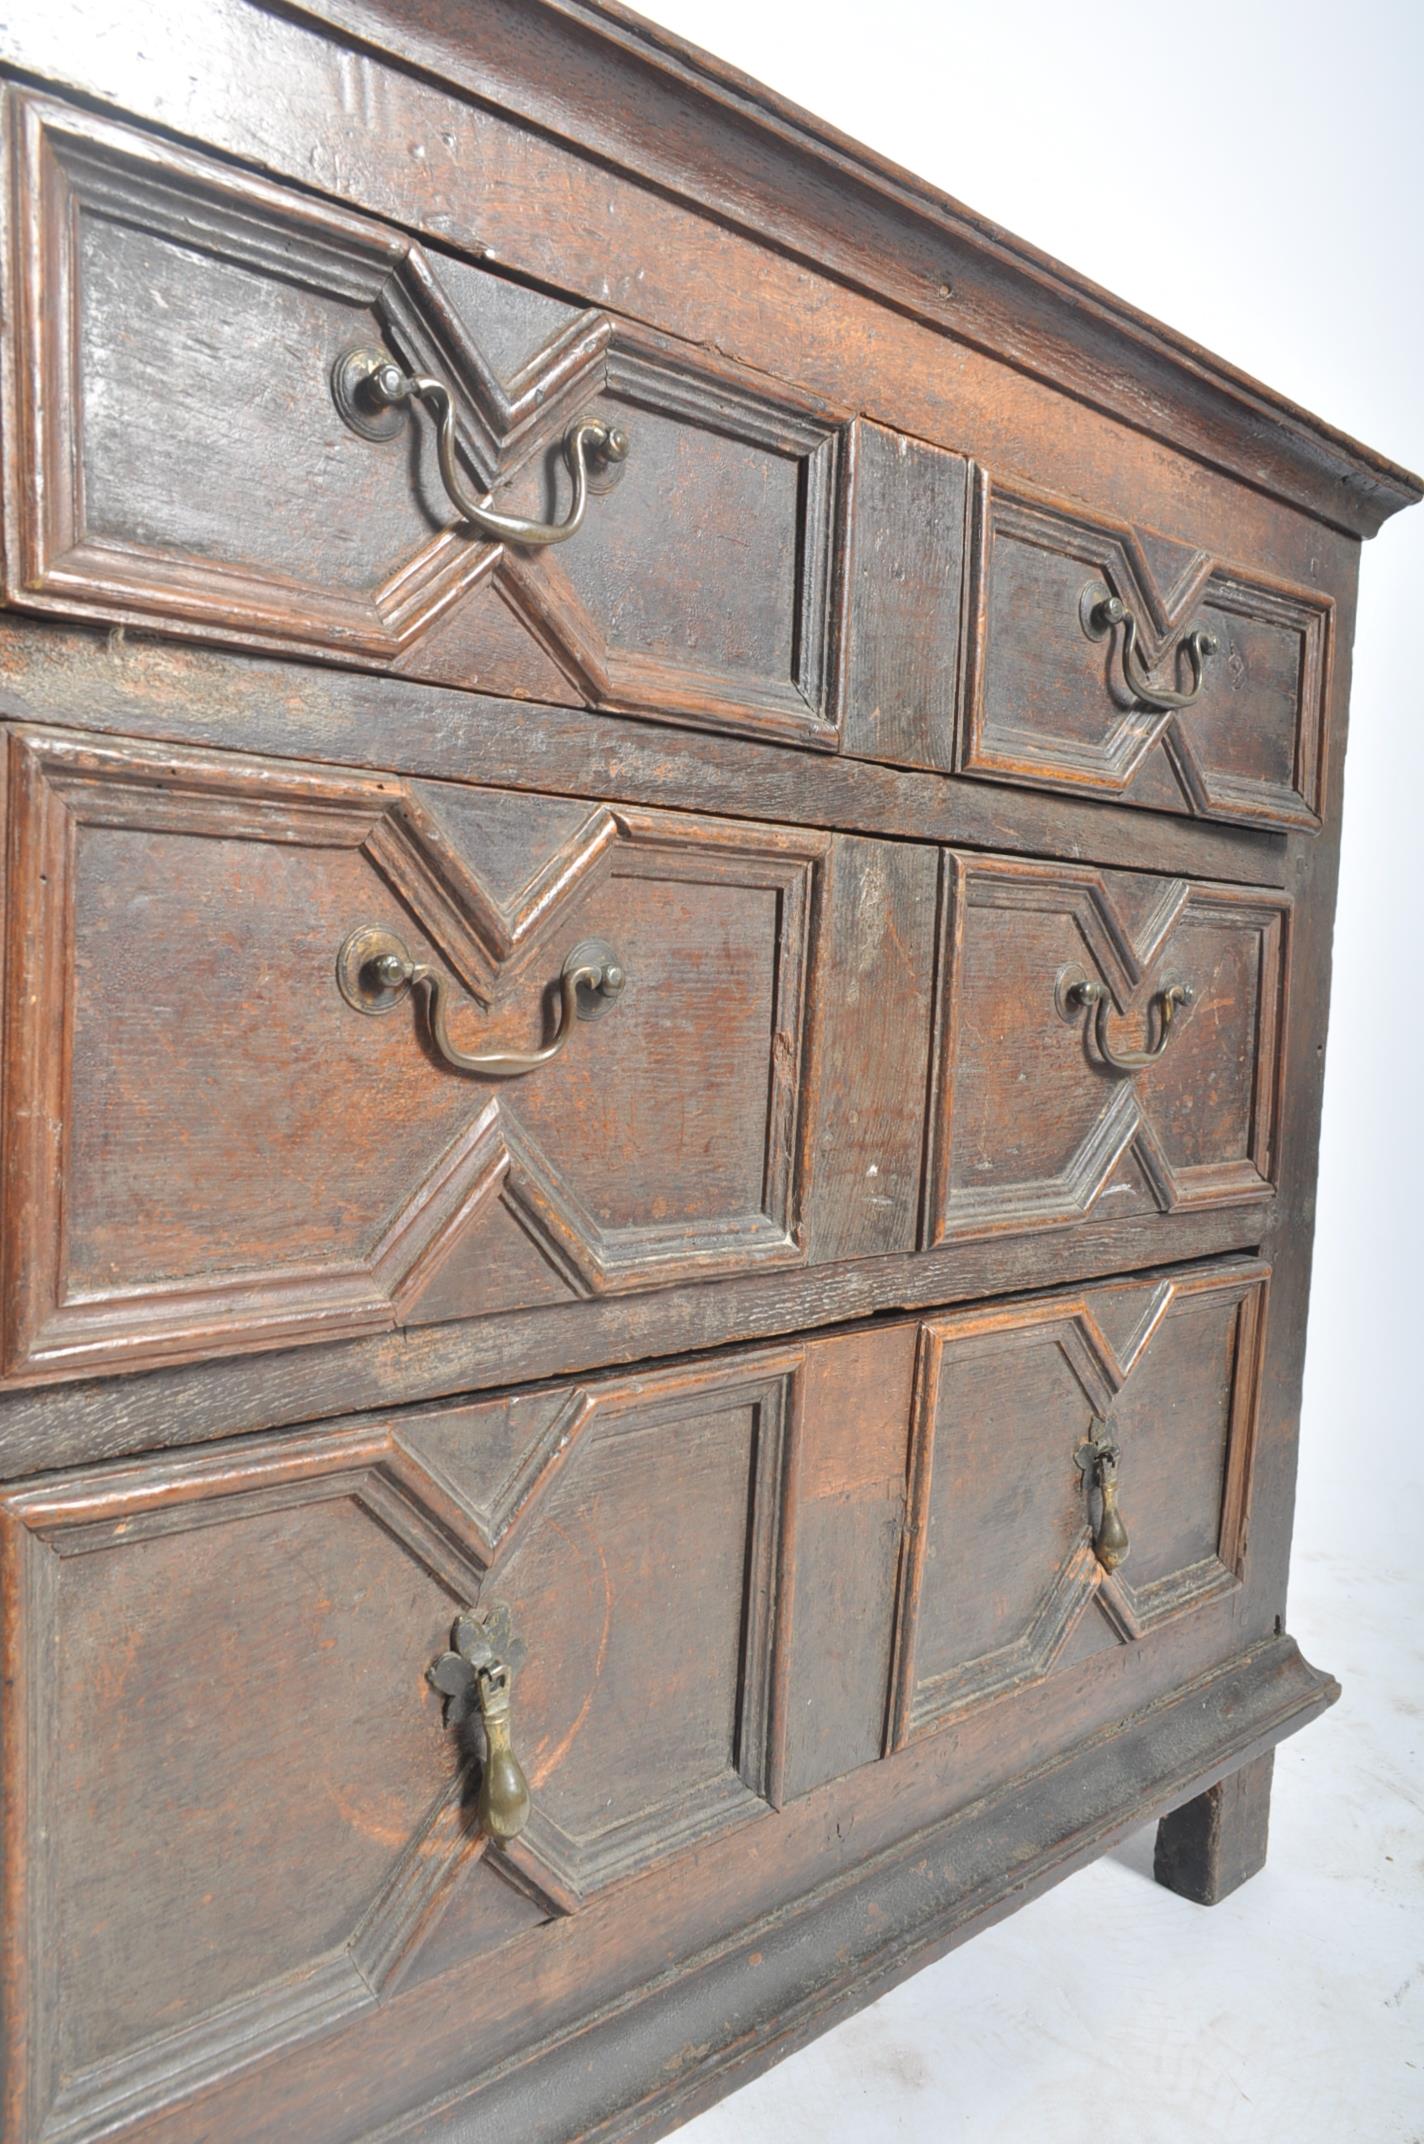 17TH CENTURY JACOBEAN PERIOD OAK WOOD CHEST OF DRAWERS - Image 4 of 7